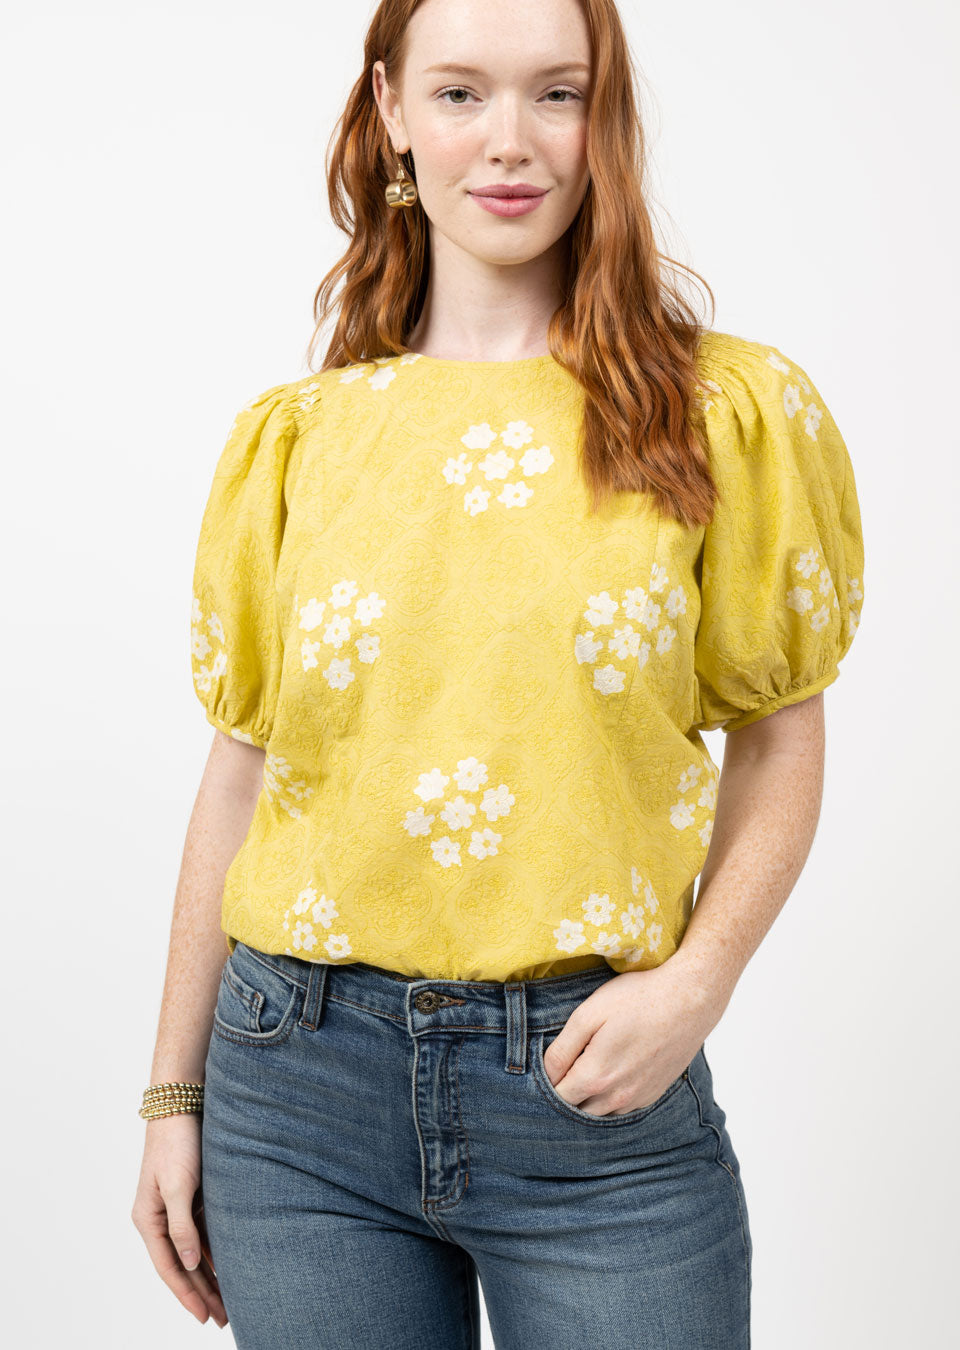 Ivy Jane Mustard Over Embroidered Top